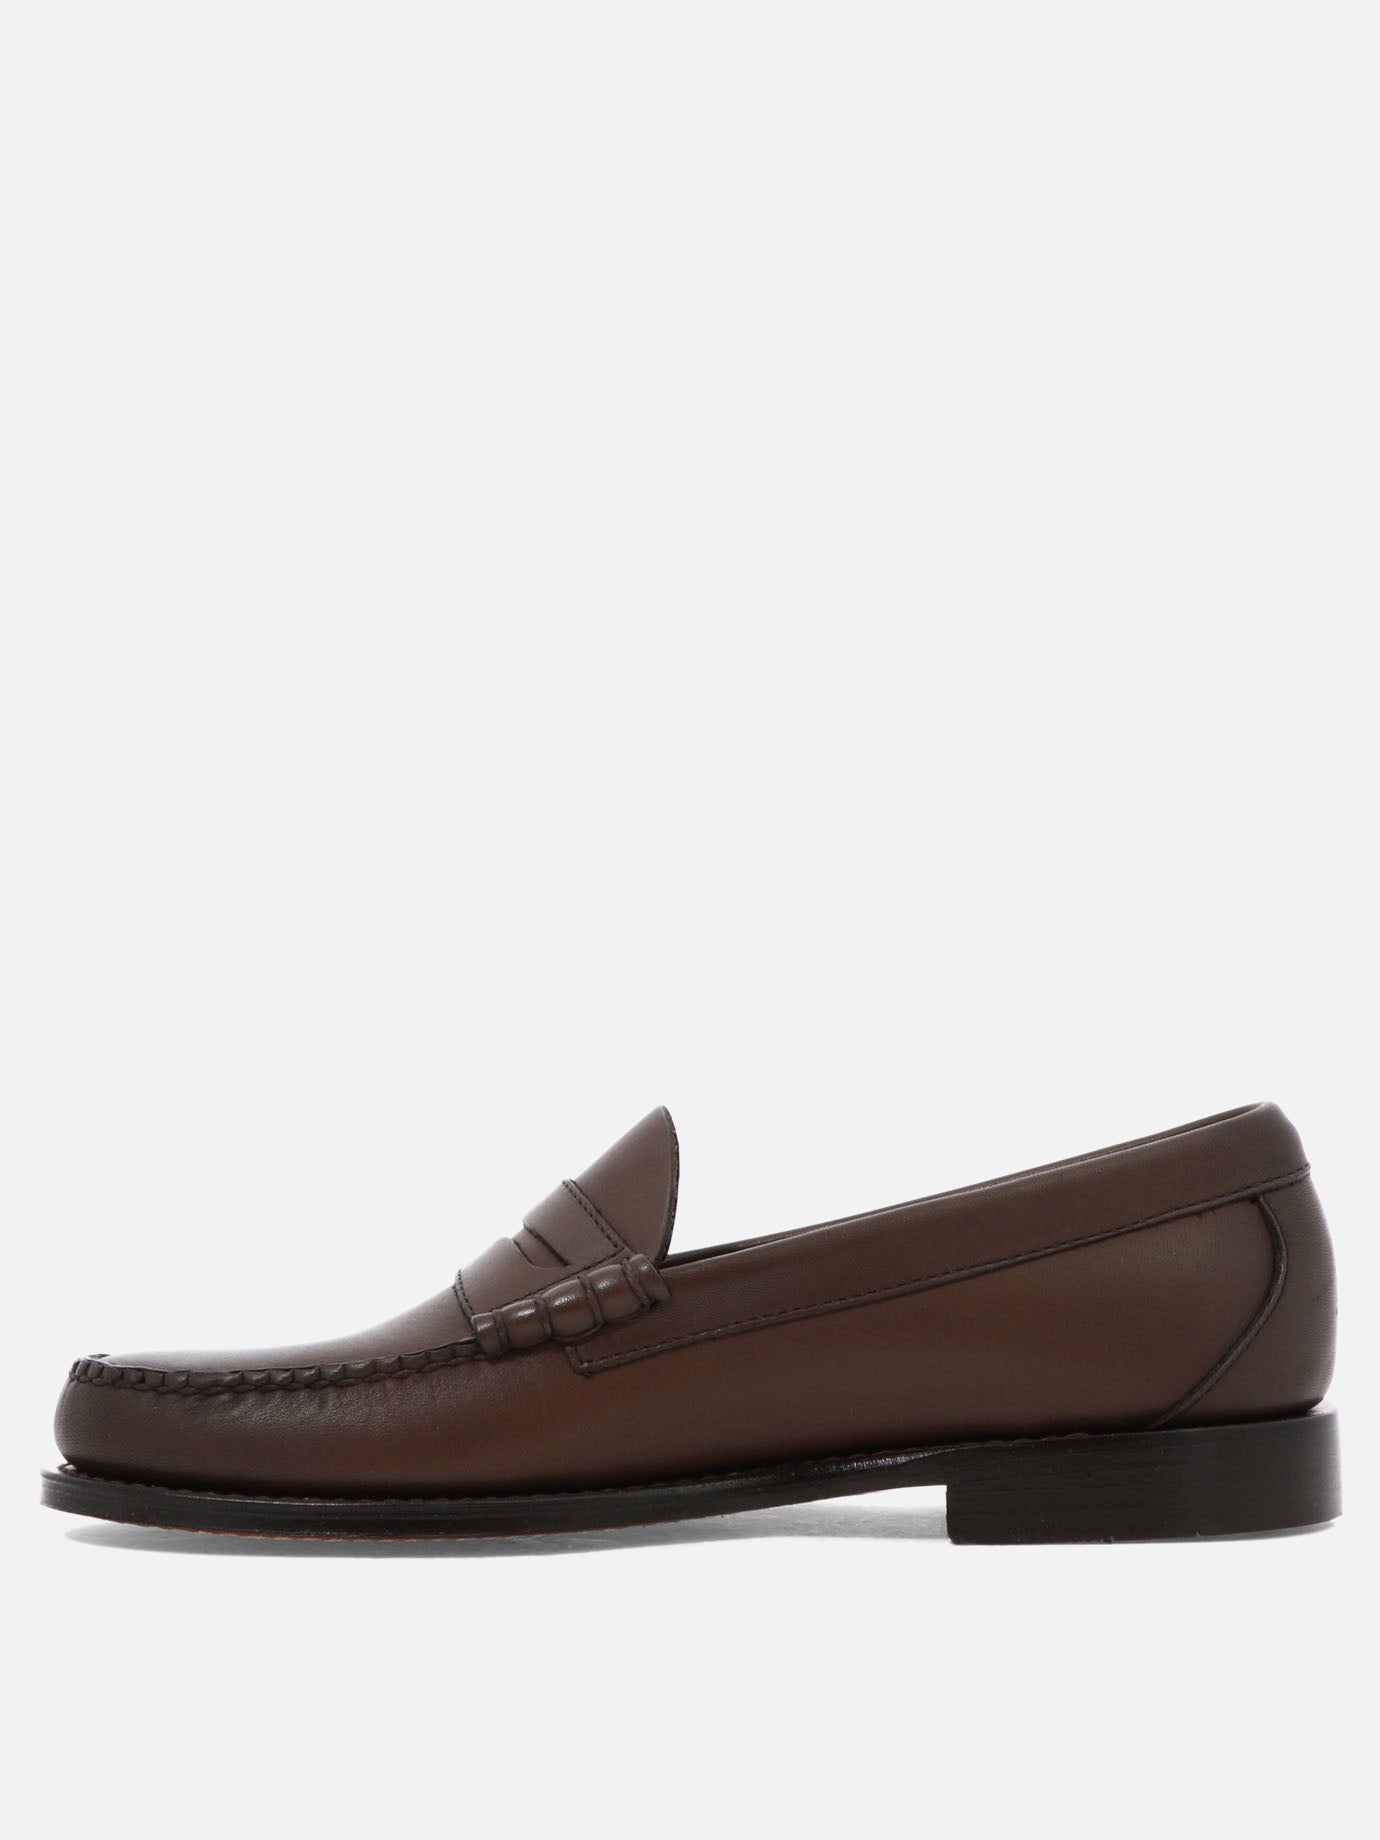 "Weejuns Heritage Larson" loafers